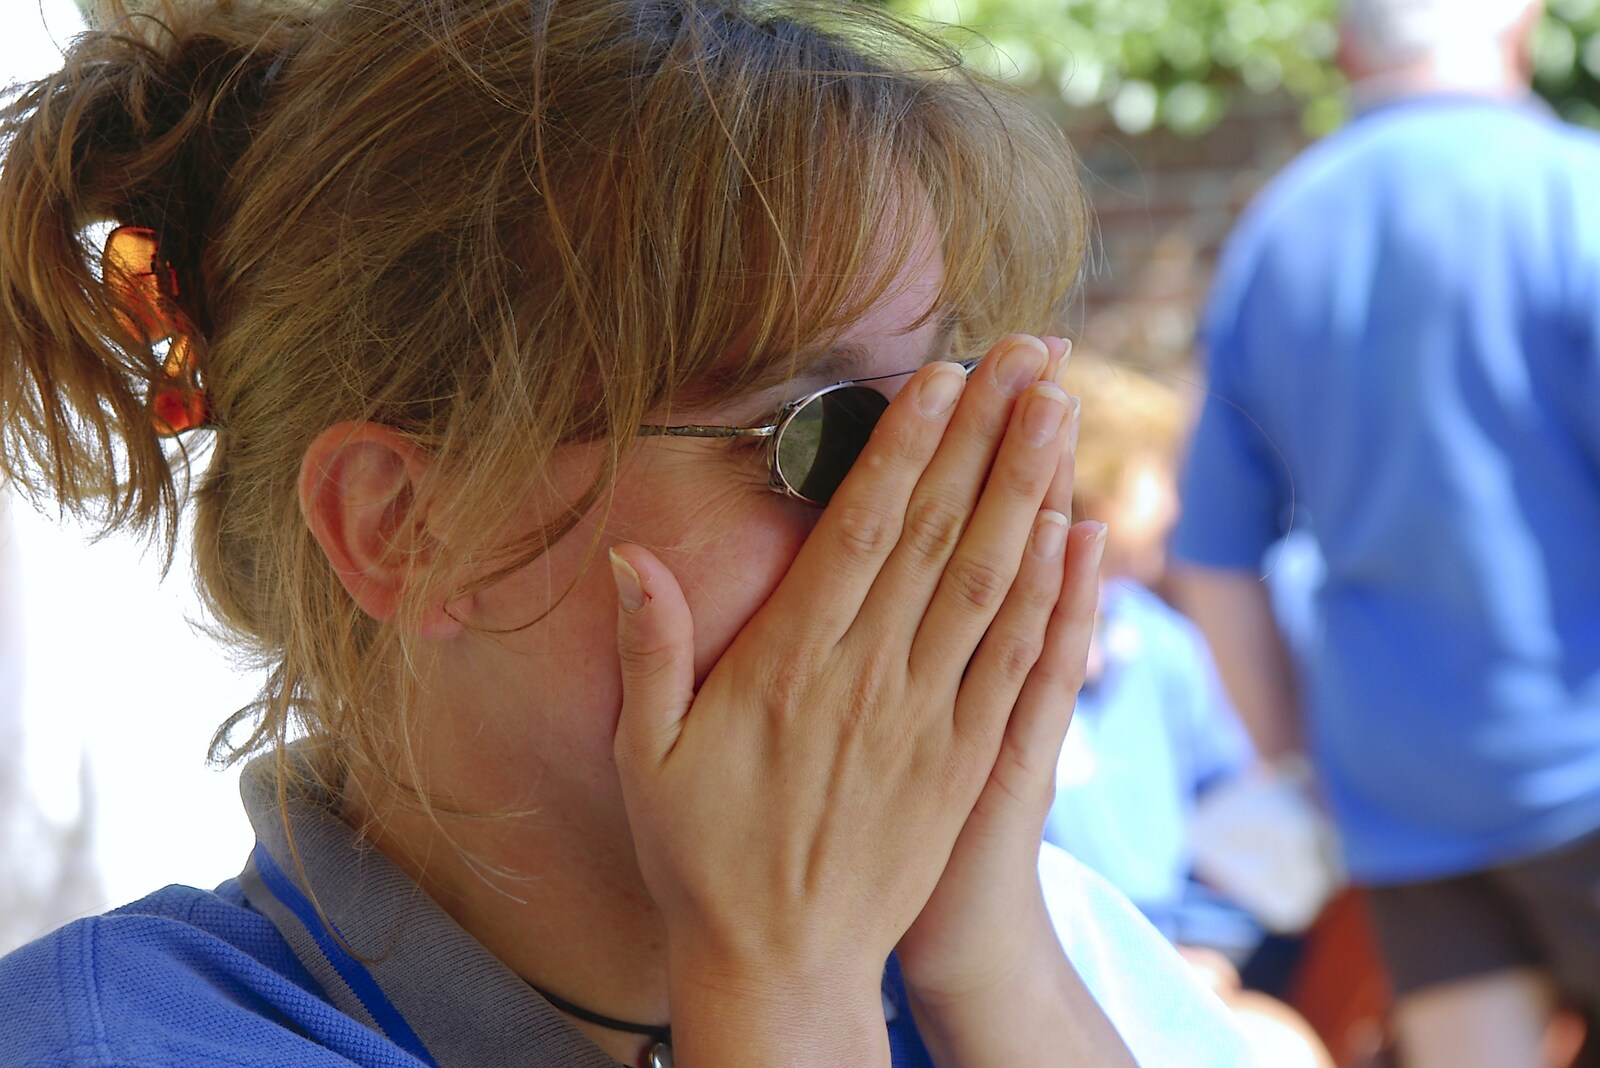 Suey covers her face from The BSCC Charity Bike Ride, Orford, Suffolk - 15th July 2006